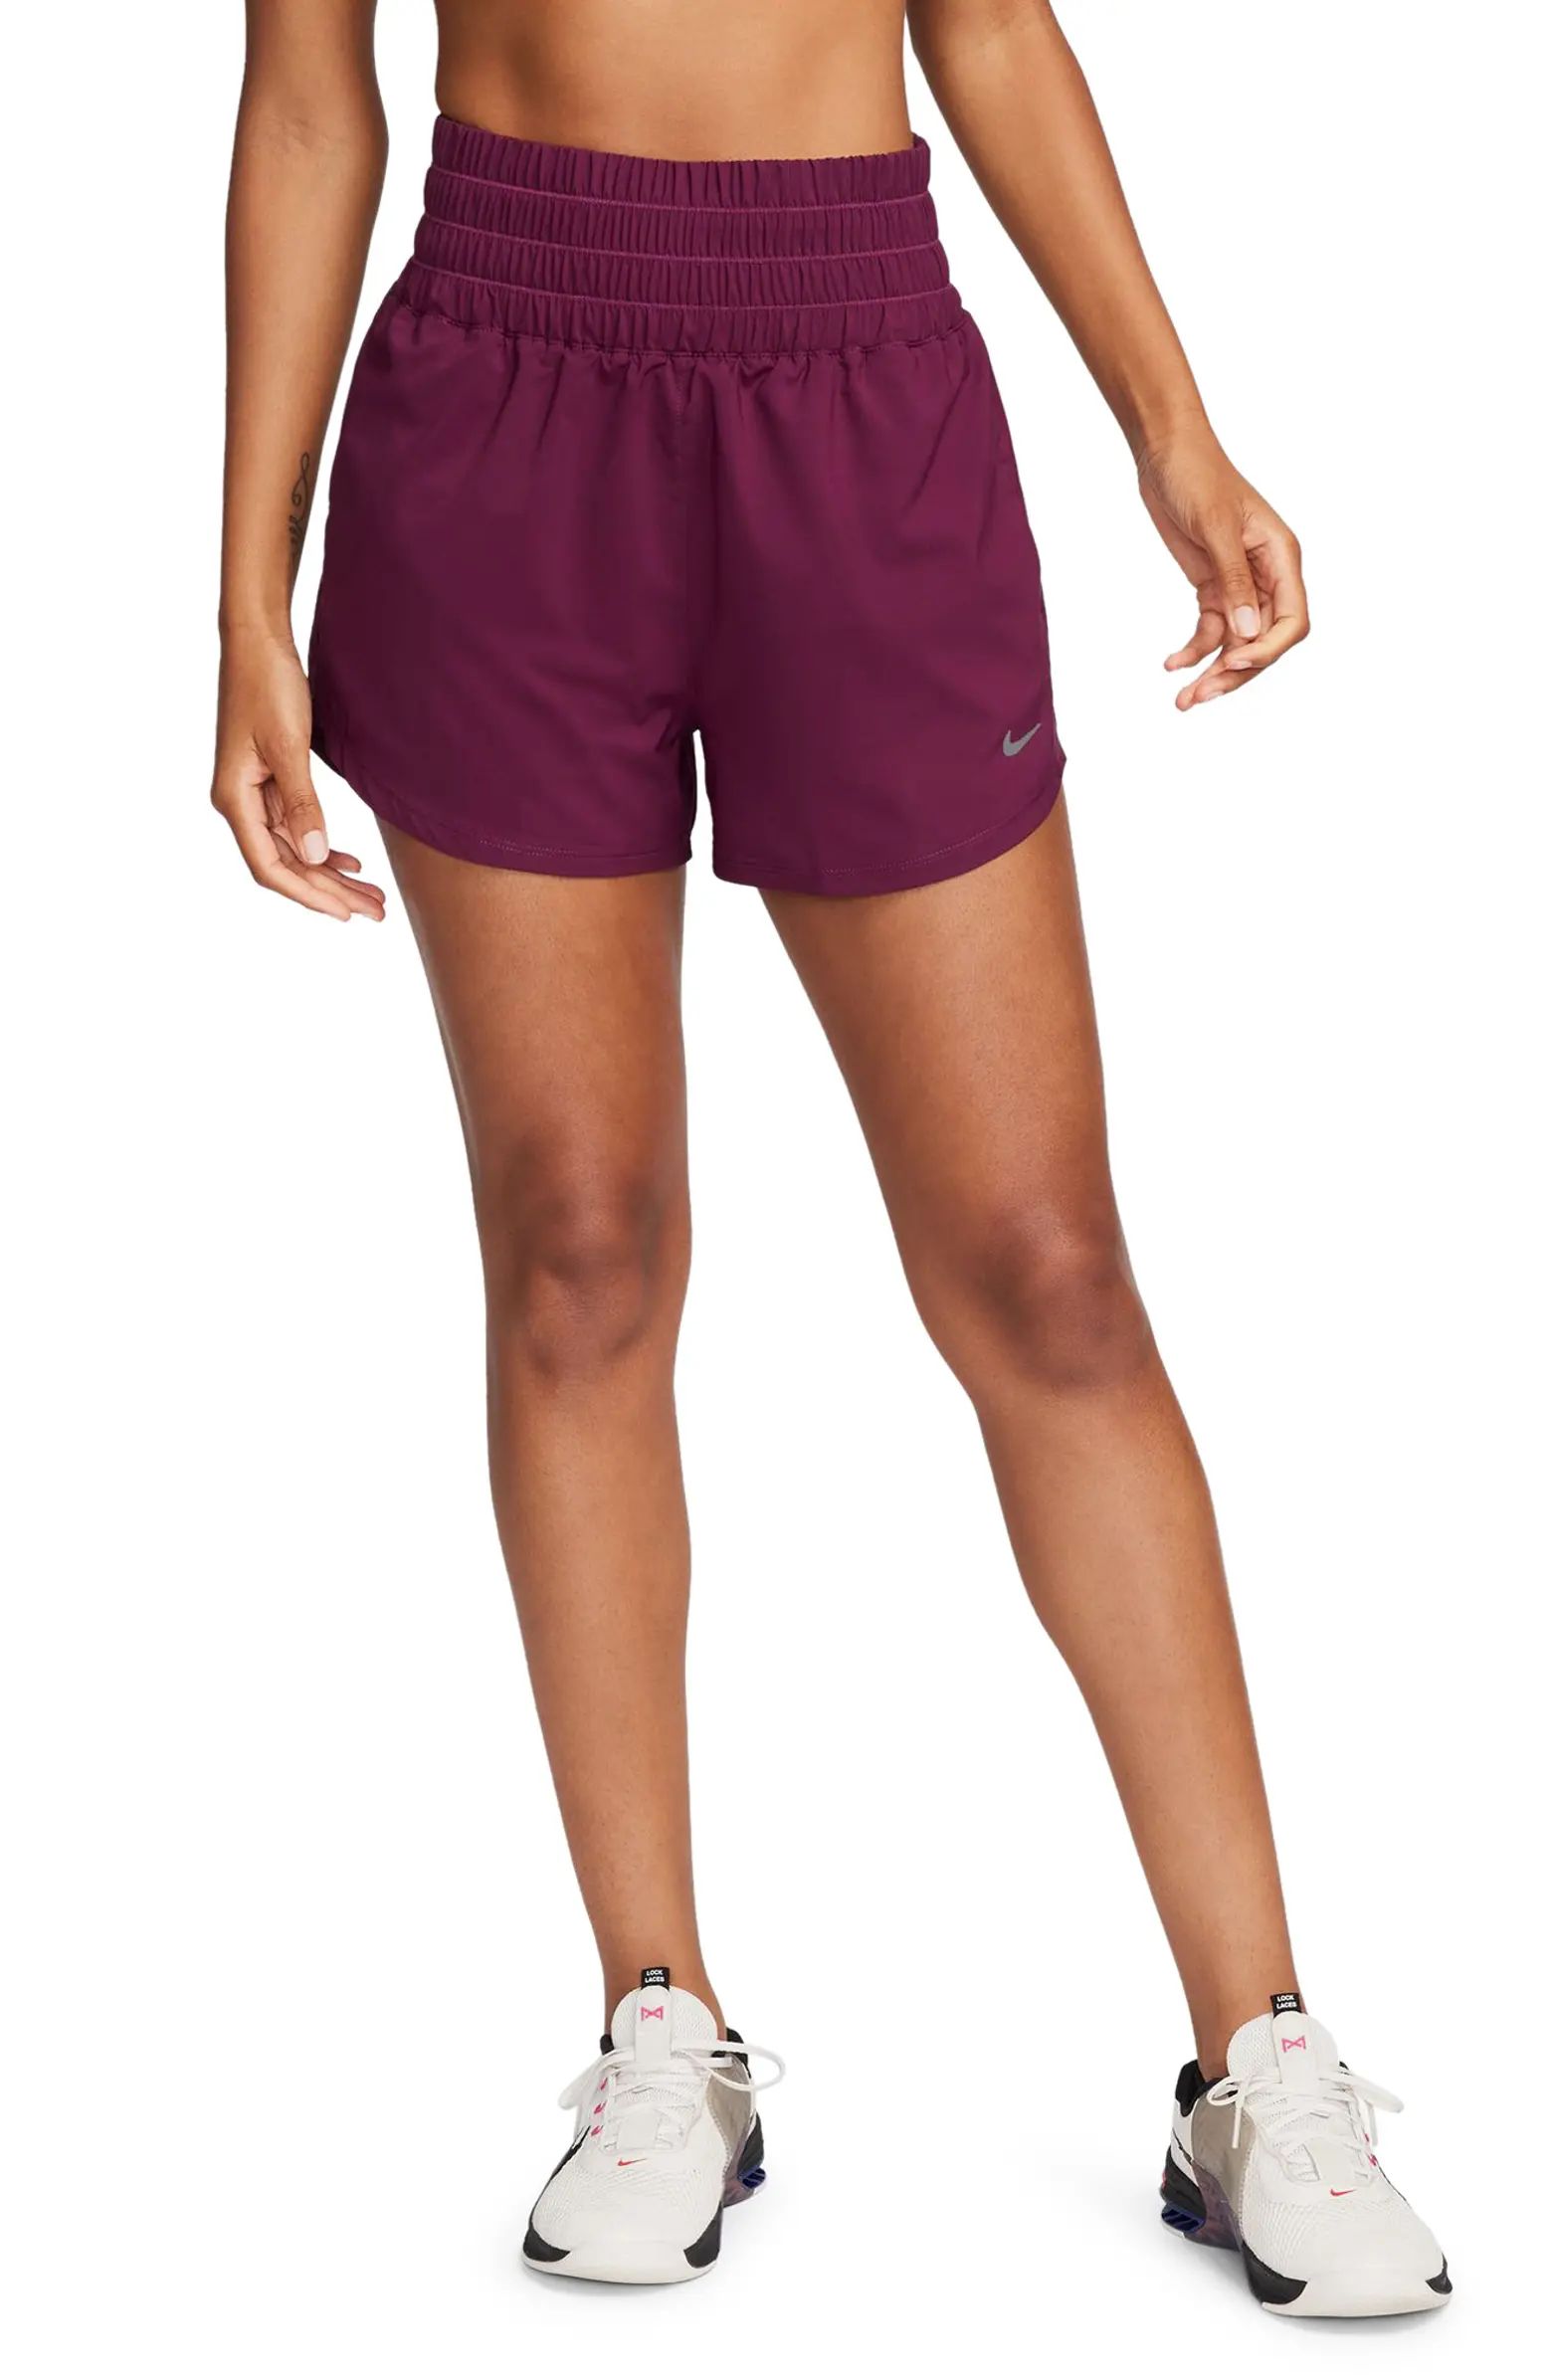 Dri-FIT Ultrahigh Waist 3-Inch Brief Lined Shorts | Nordstrom